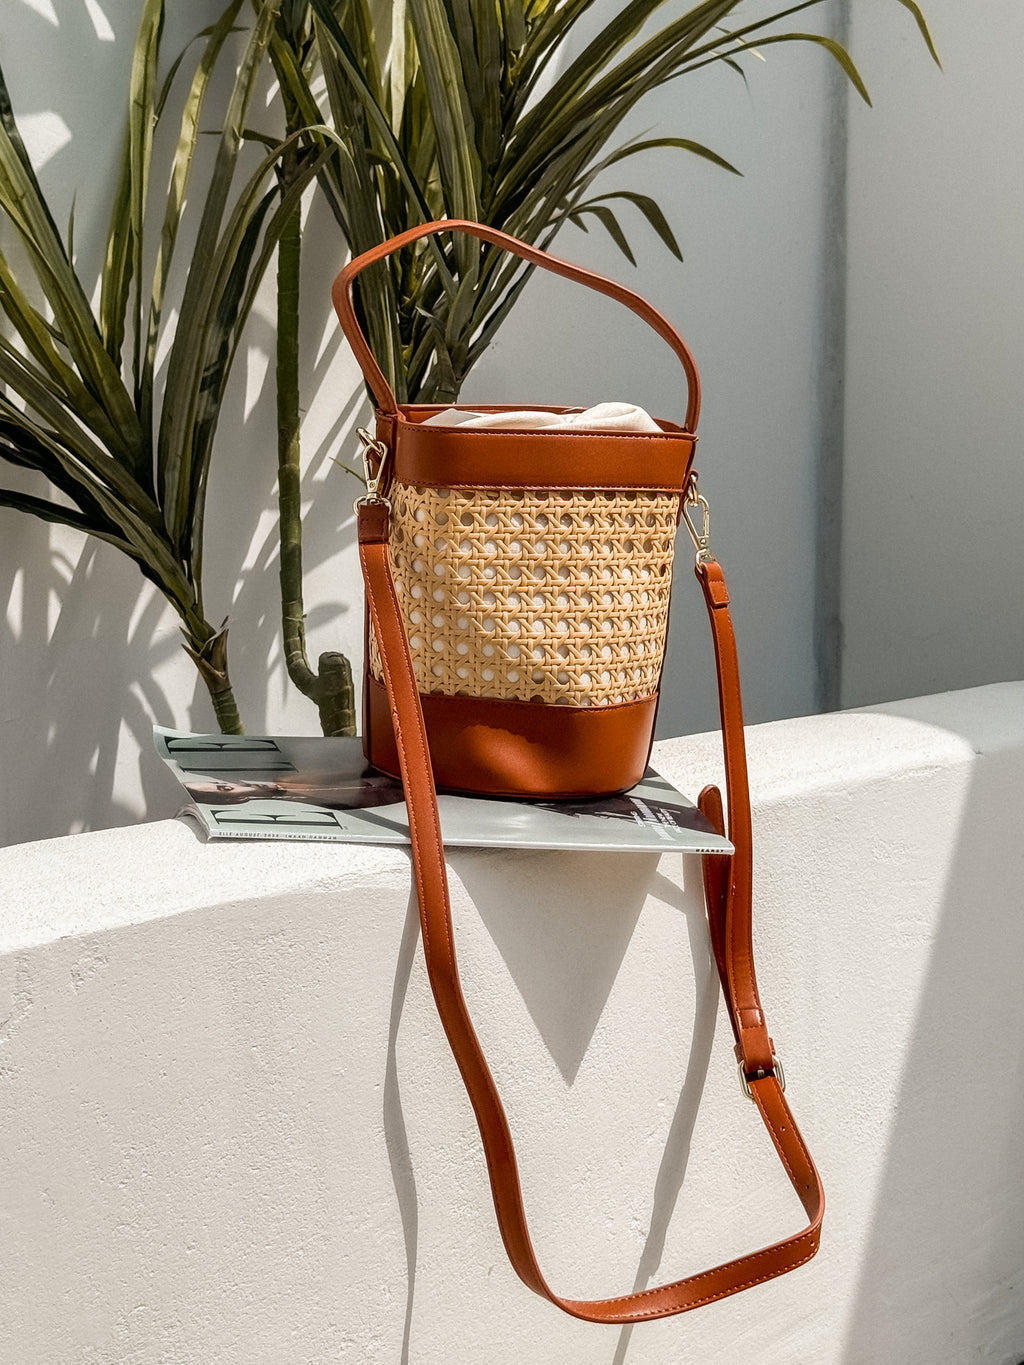 Rome Basket Crossbody Bag in Coffee - Stitch And Feather